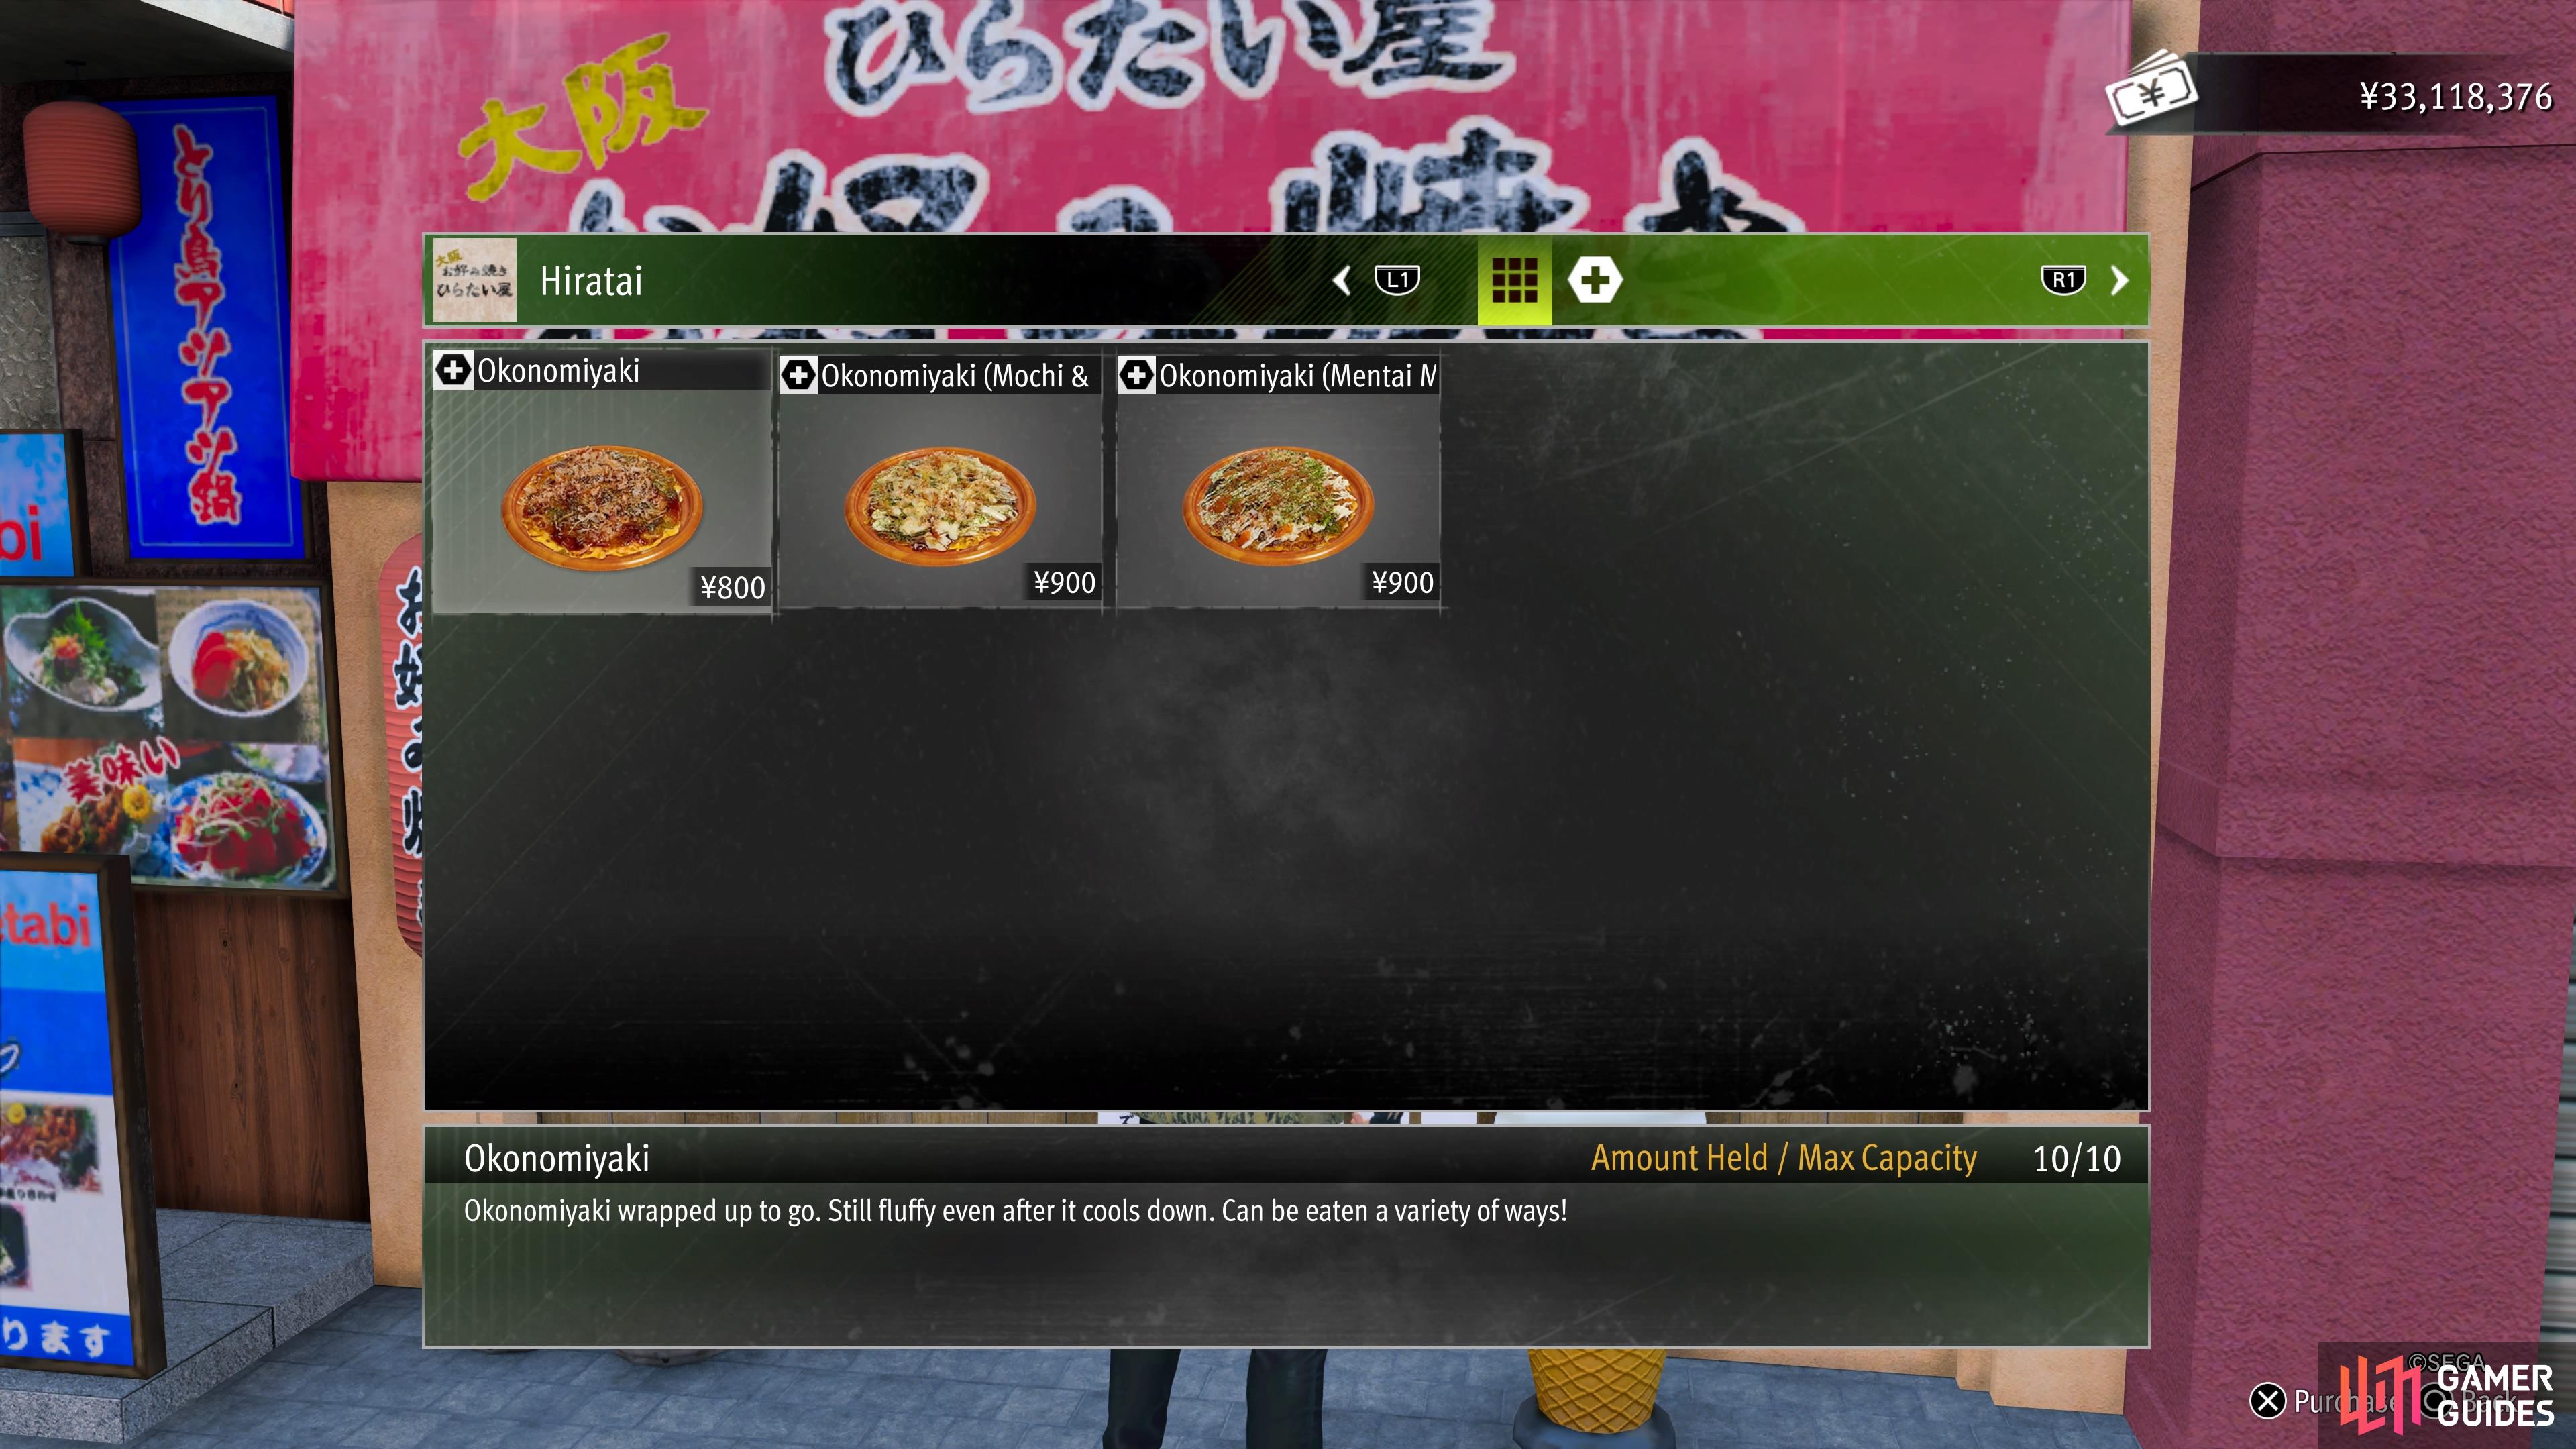 It can be hard to find the place that sells Okonomiyaki.